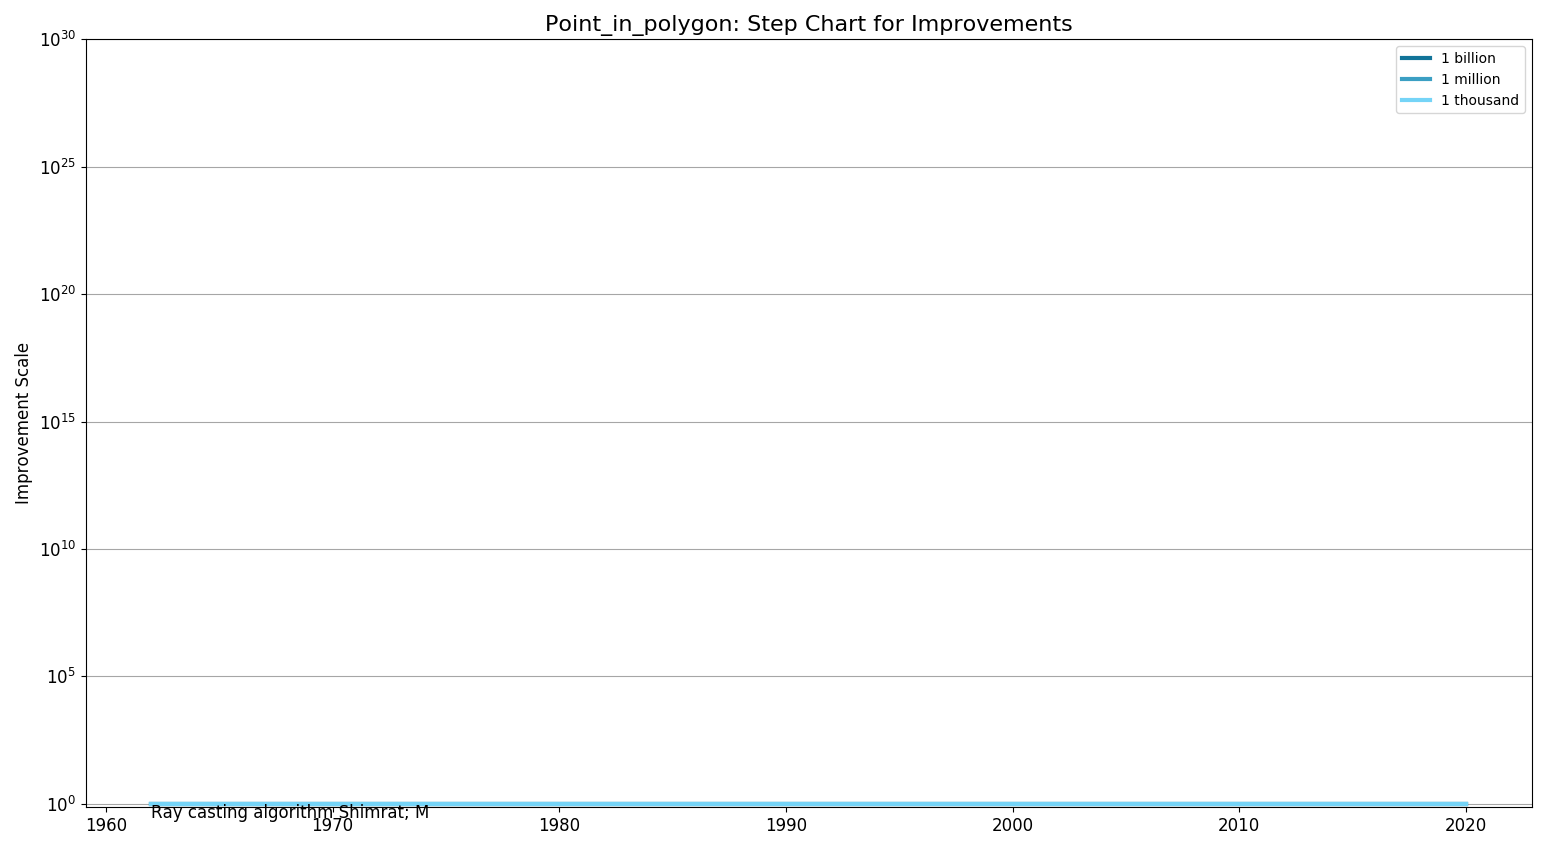 Point in polygonStepChart.png